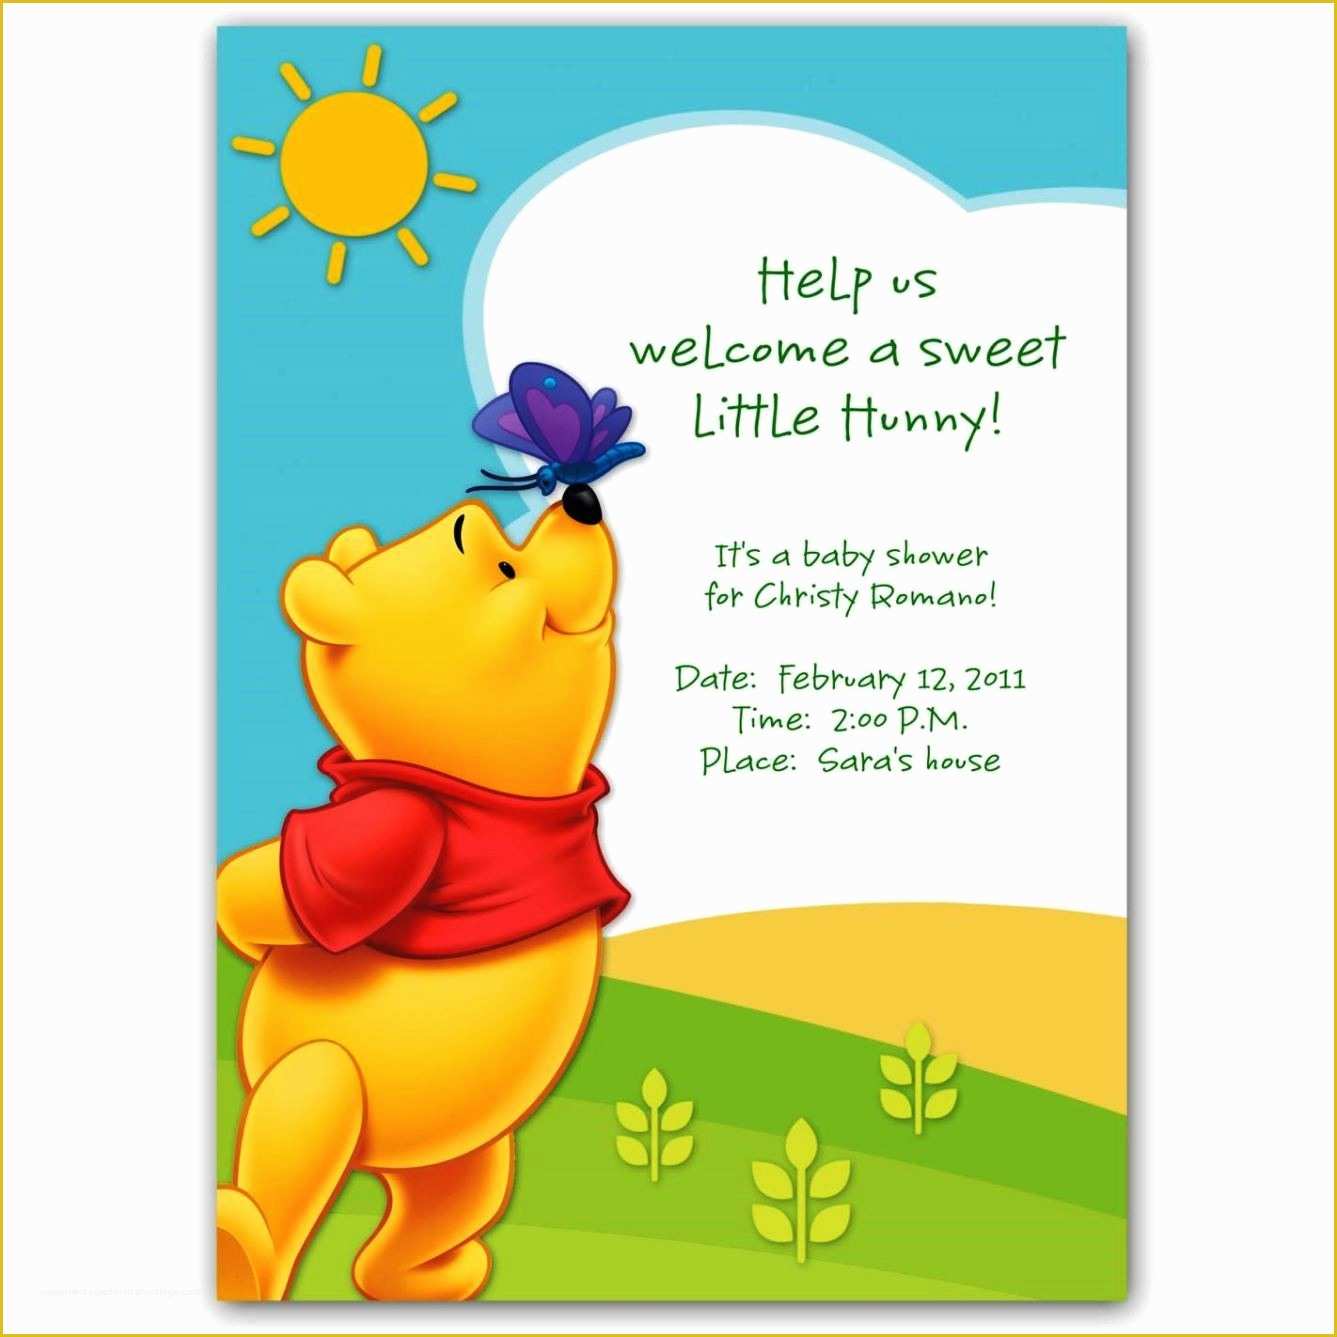 Winnie the Pooh Baby Shower Invitations Templates Free Of Winnie the Pooh Baby Shower Invitations Templates Free